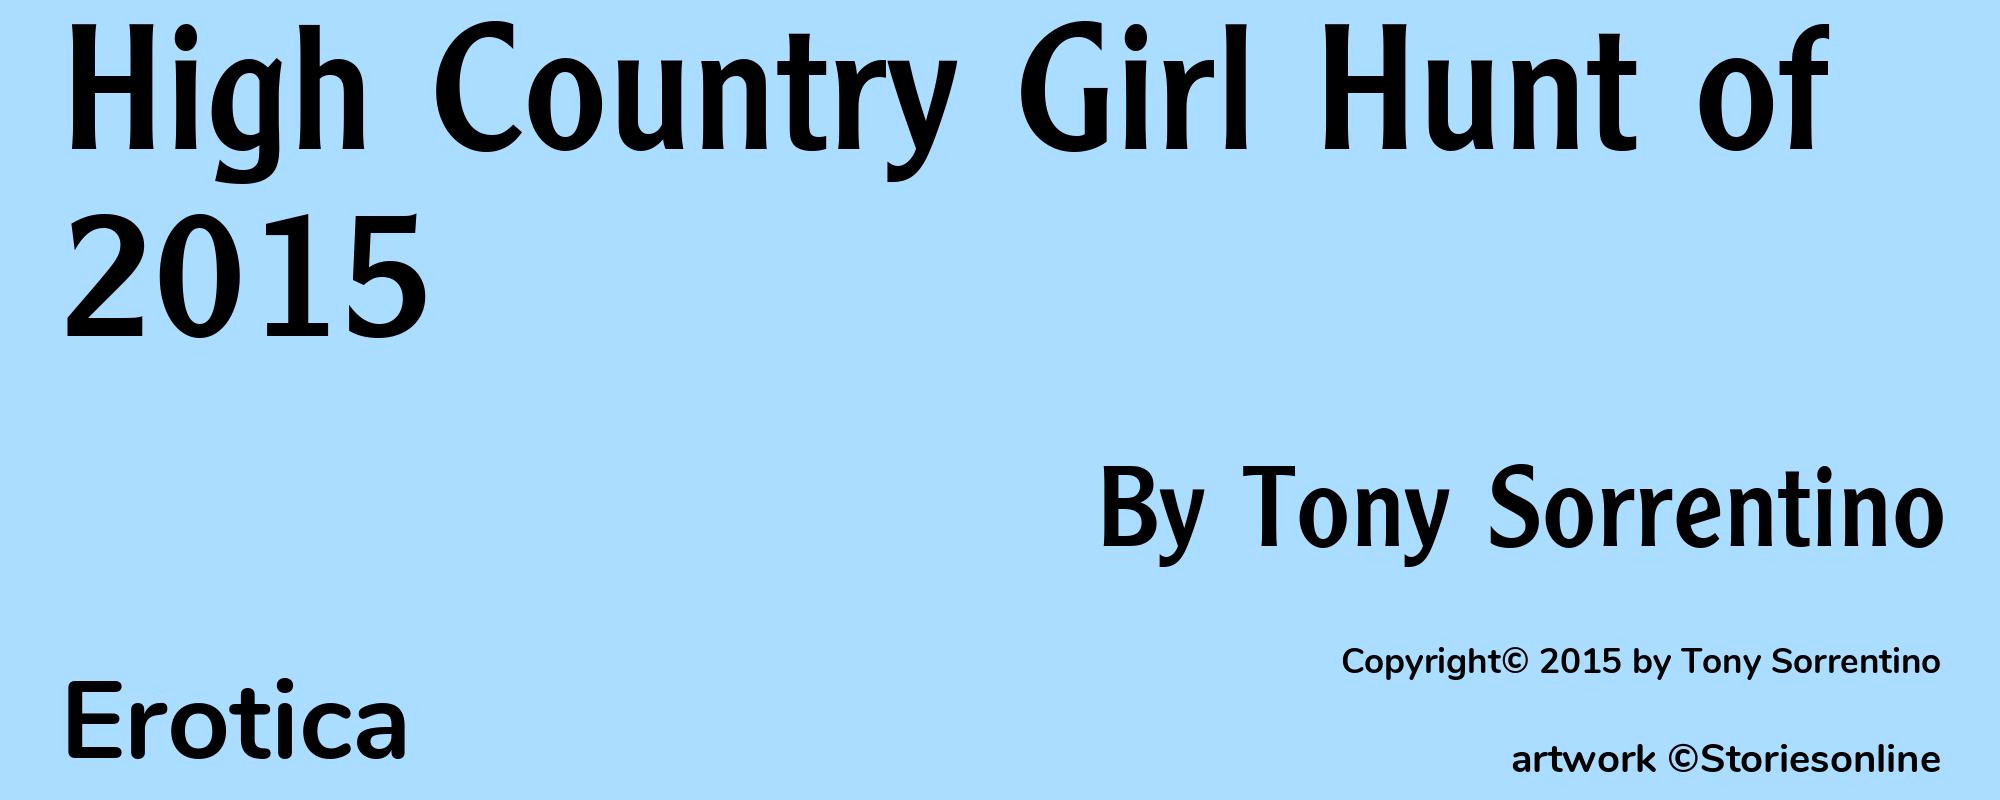 High Country Girl Hunt of 2015 - Cover